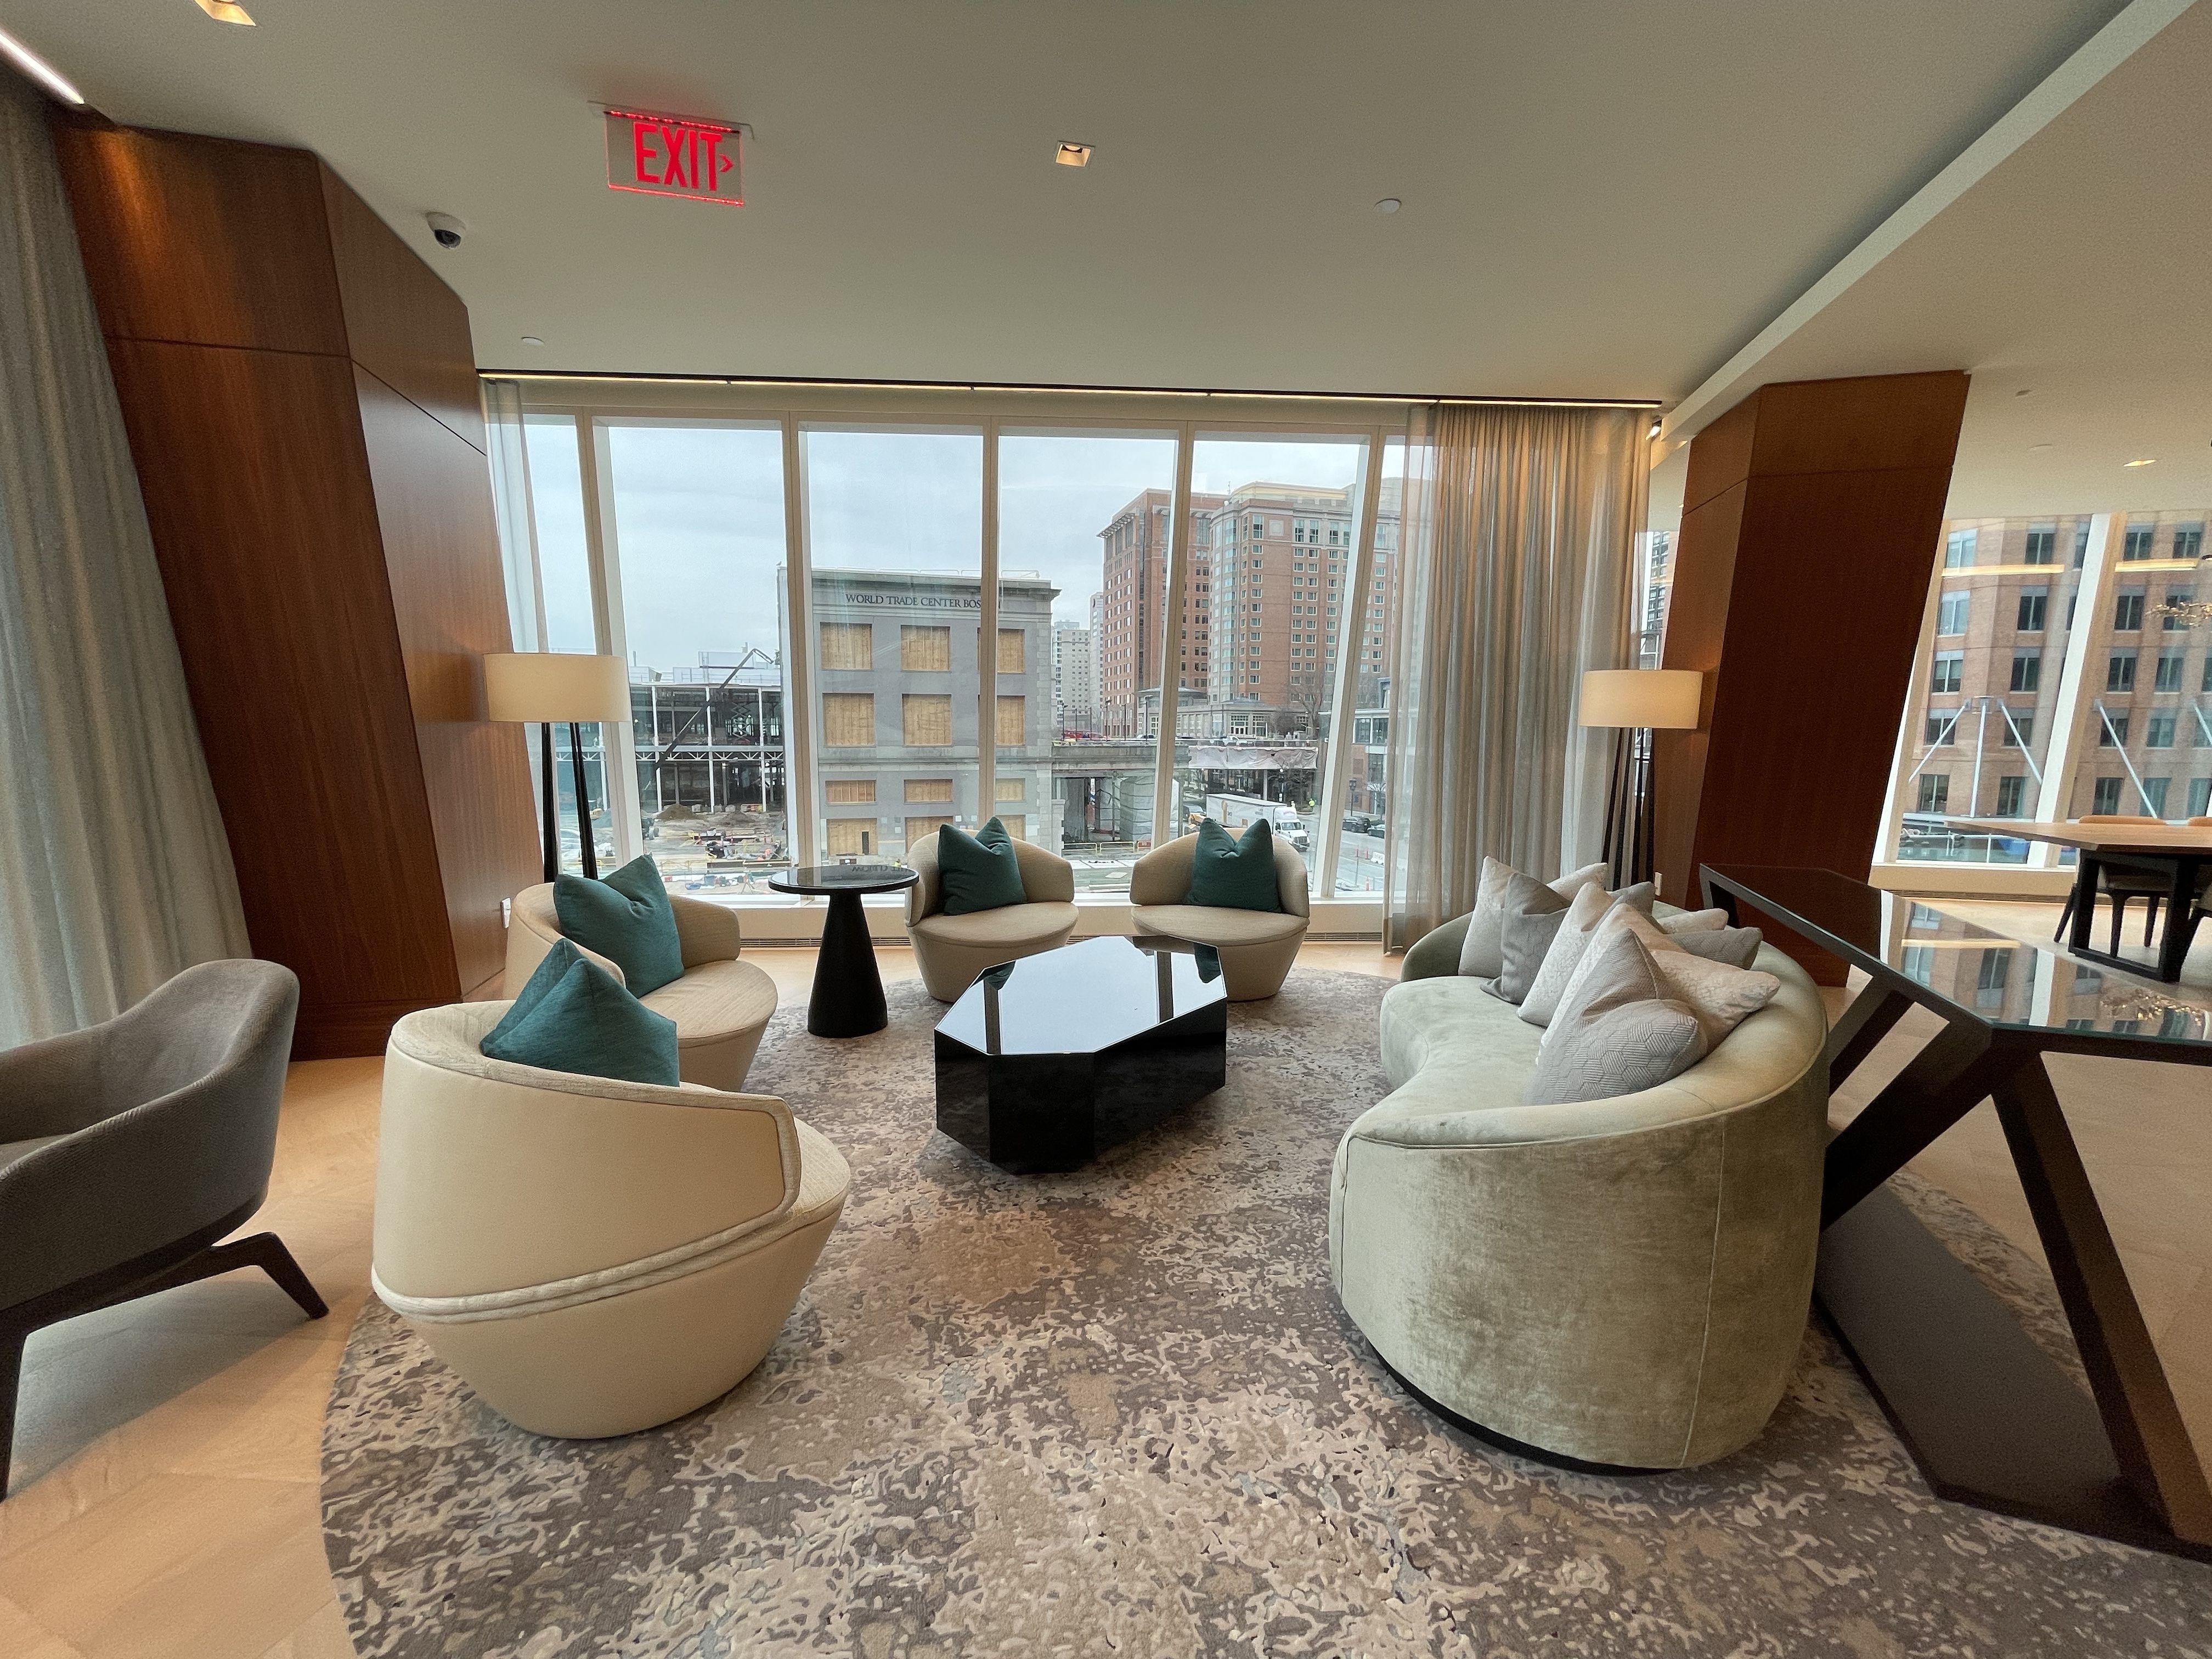 Multiple armchairs are placed in a common lounge area of the St. Regis residences.